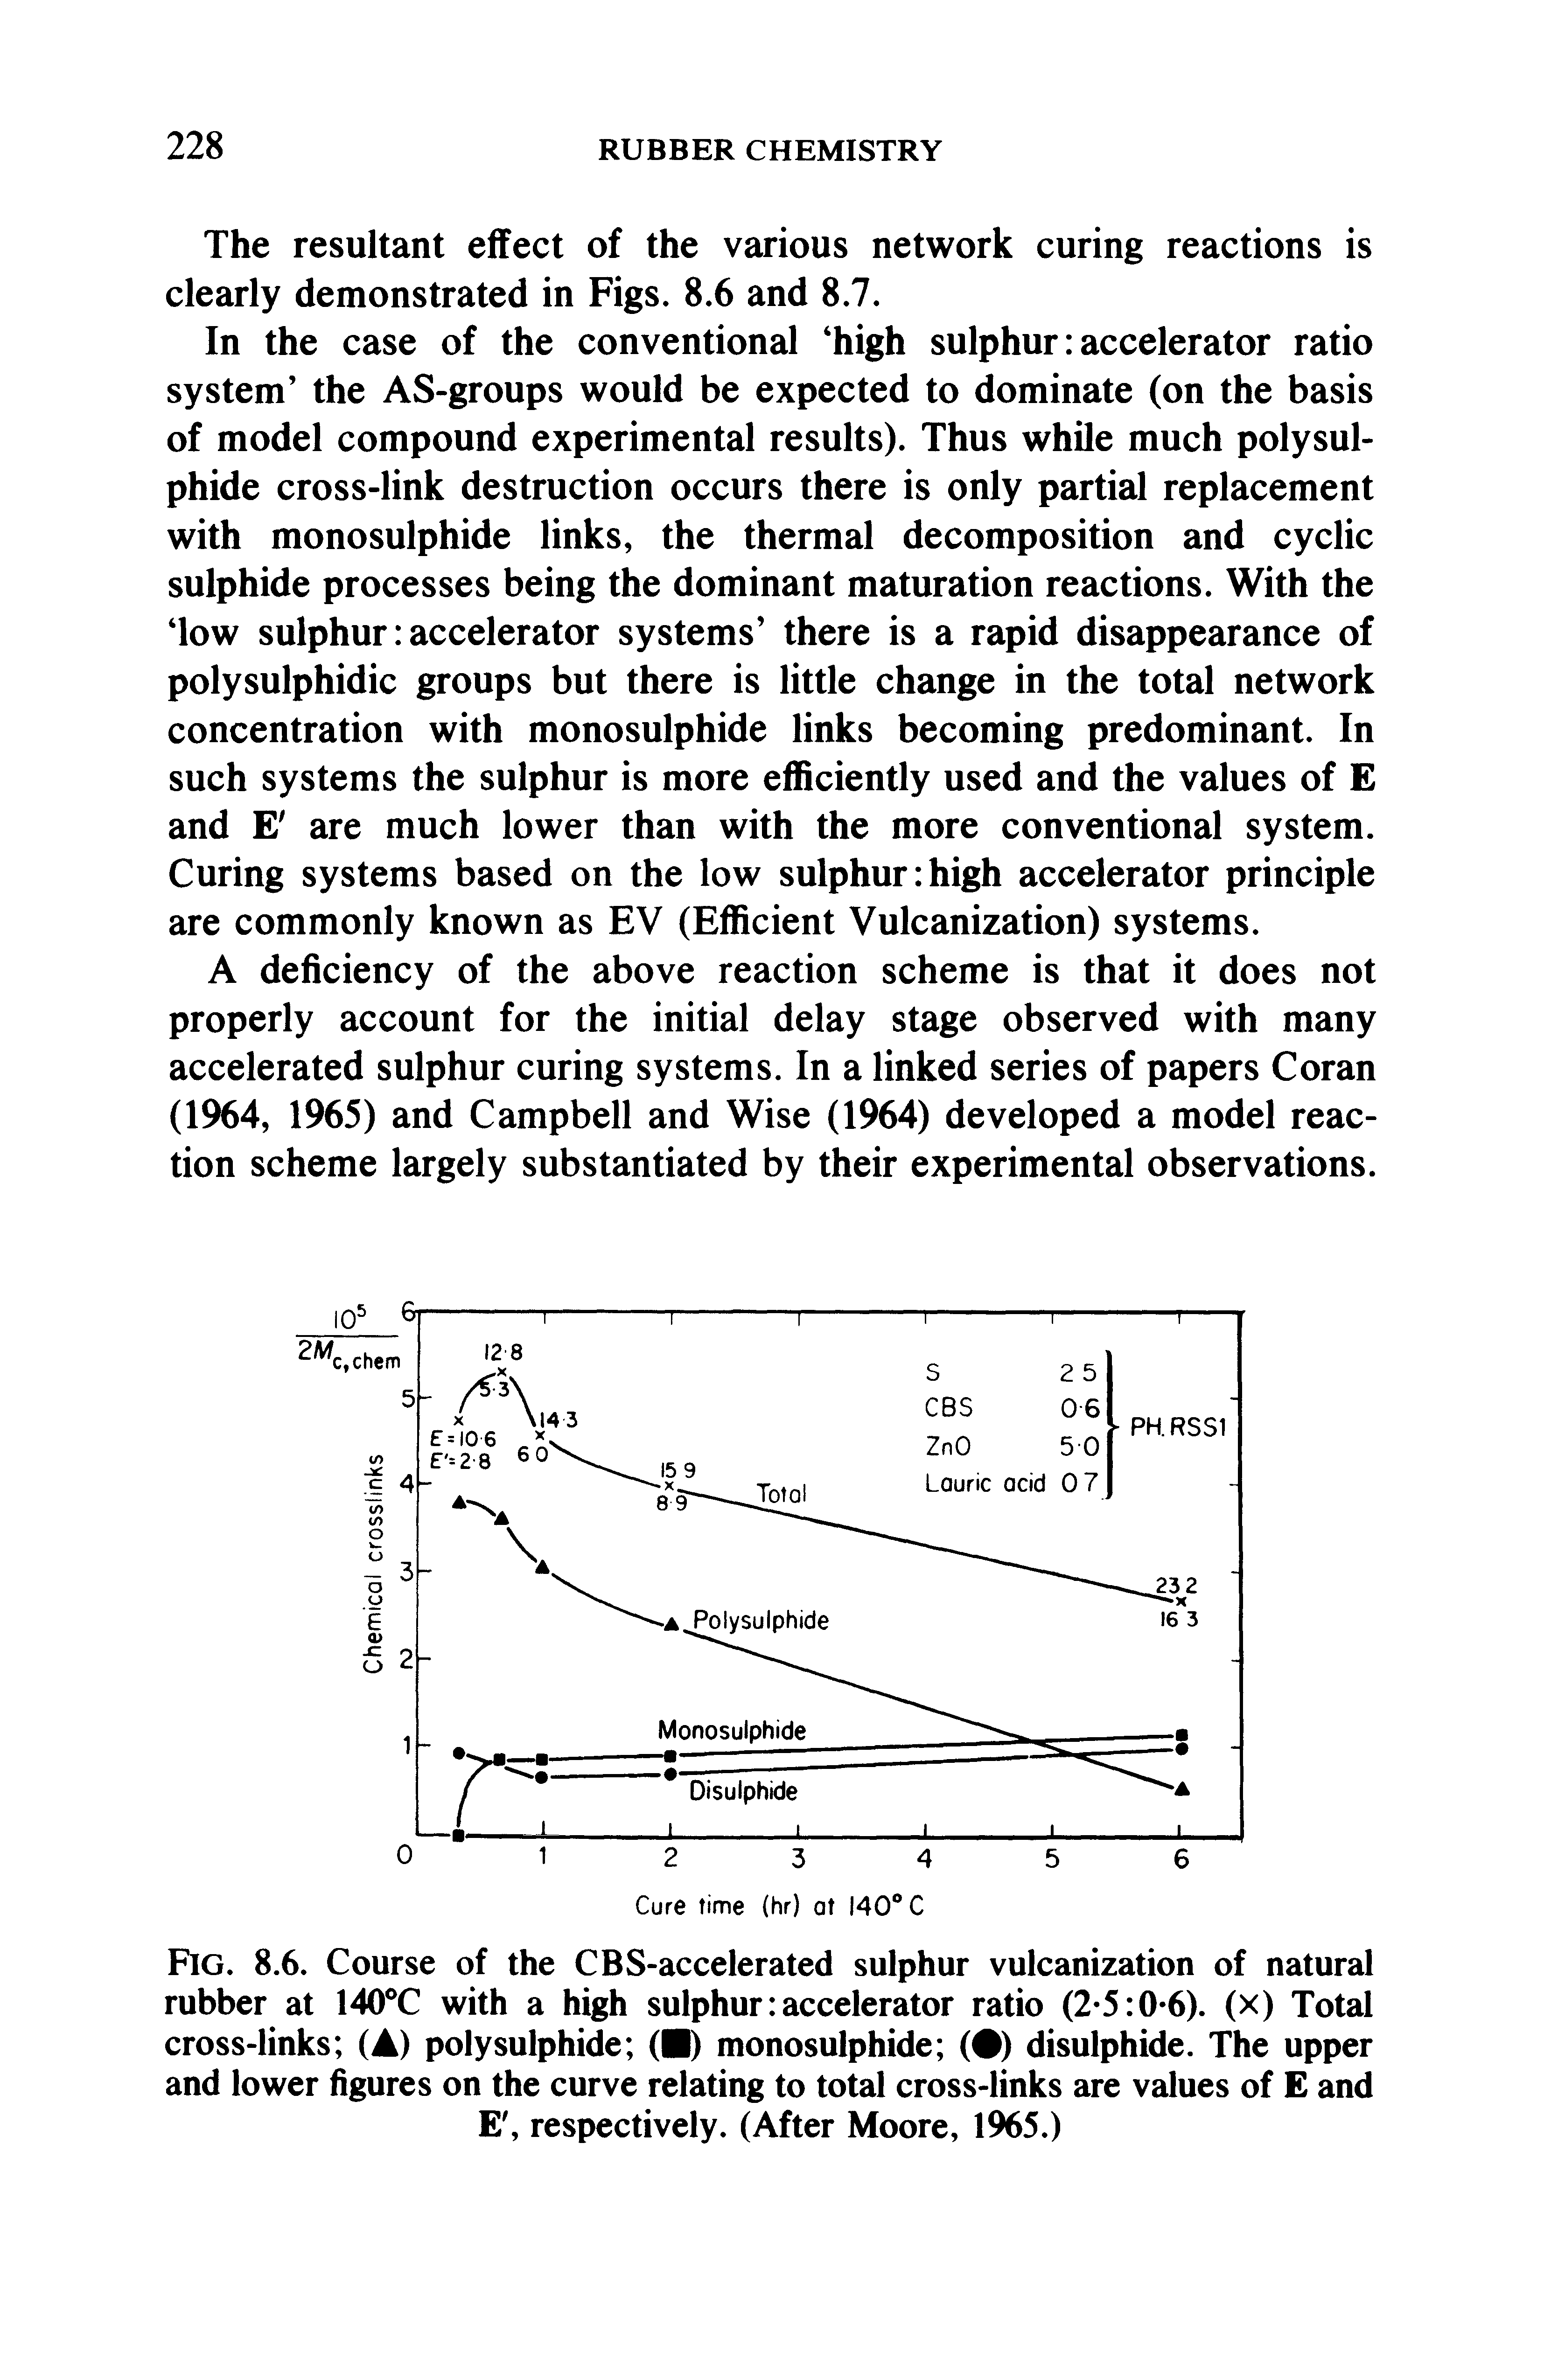 Fig. 8.6. Course of the CBS-accelerated sulphur vulcanization of natural rubber at 140T with a high sulphur accelerator ratio (2-5 0-6). (x) Total cross-links ( ) poly sulphide ( ) monosulphide ( ) disulphide. The upper and lower figures on the curve relating to total cross-links are values of E and E, respectively. (After Moore, 1965.)...